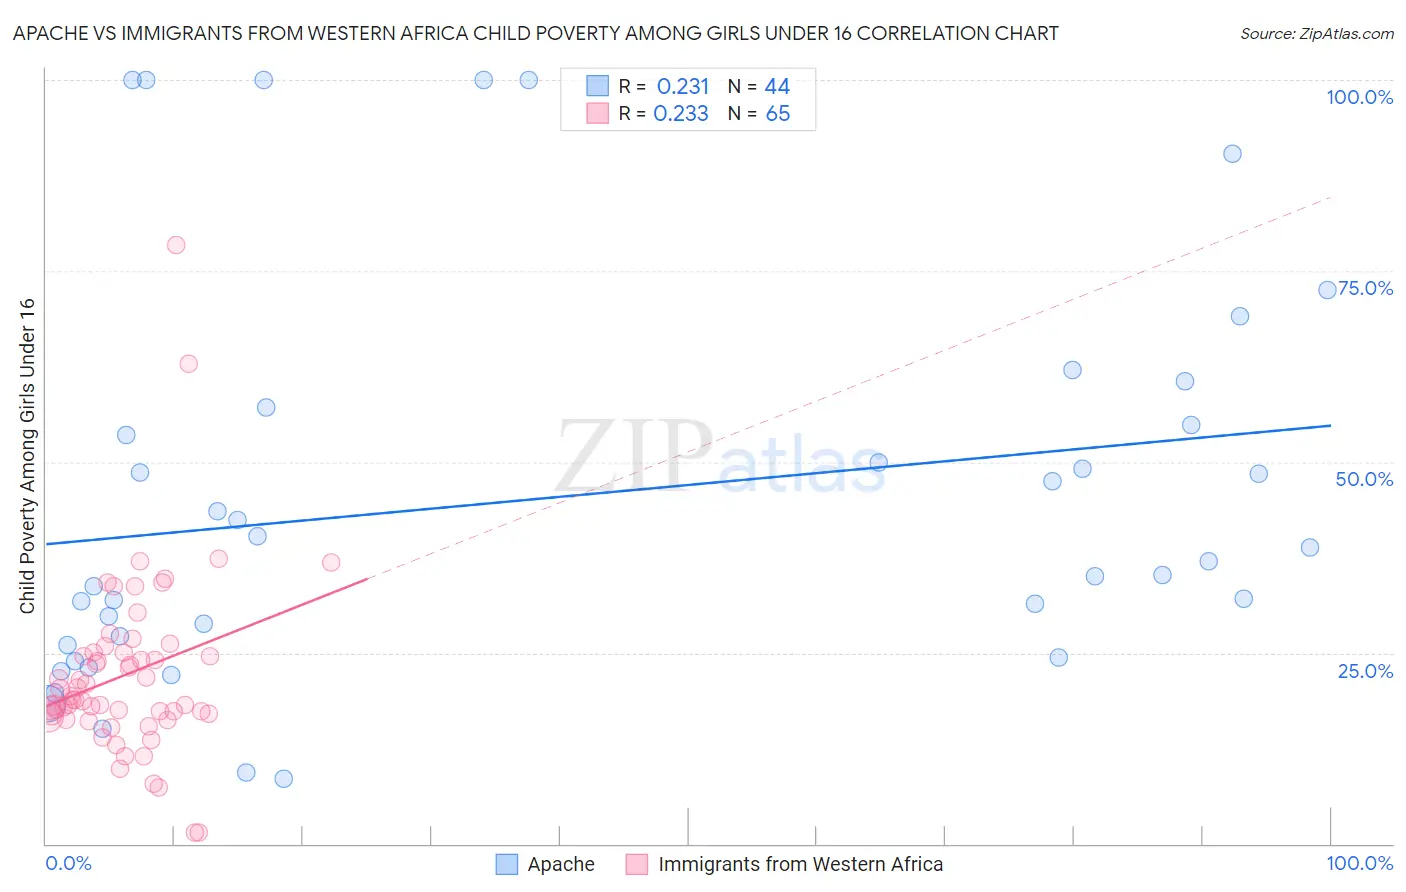 Apache vs Immigrants from Western Africa Child Poverty Among Girls Under 16